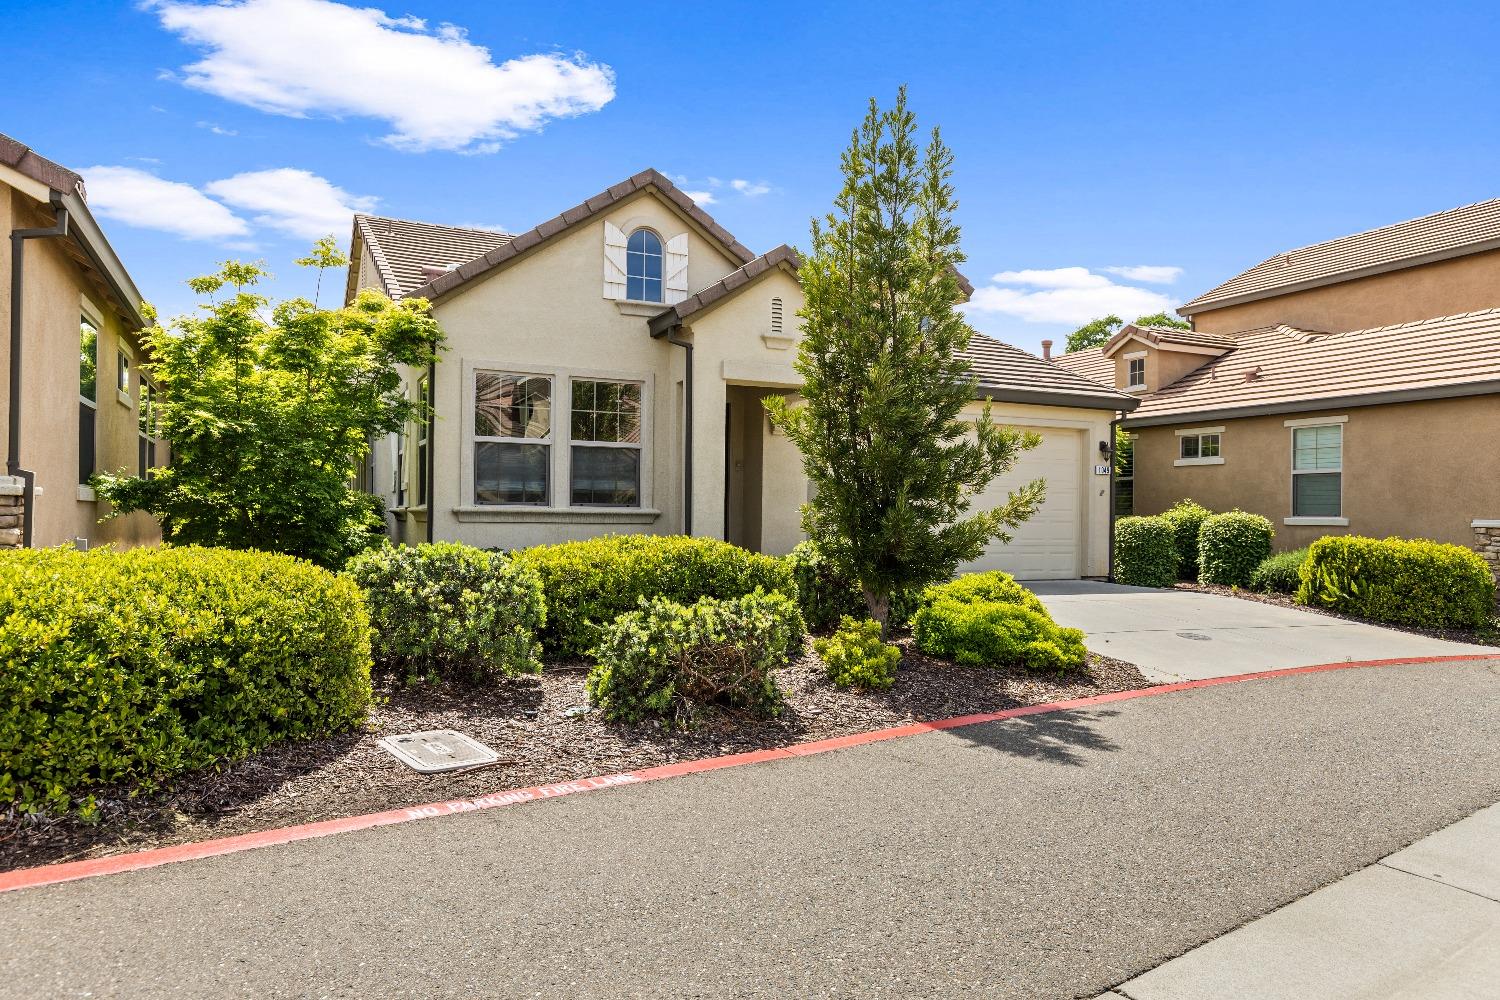 Photo of 1049 Volonne Dr in Roseville, CA